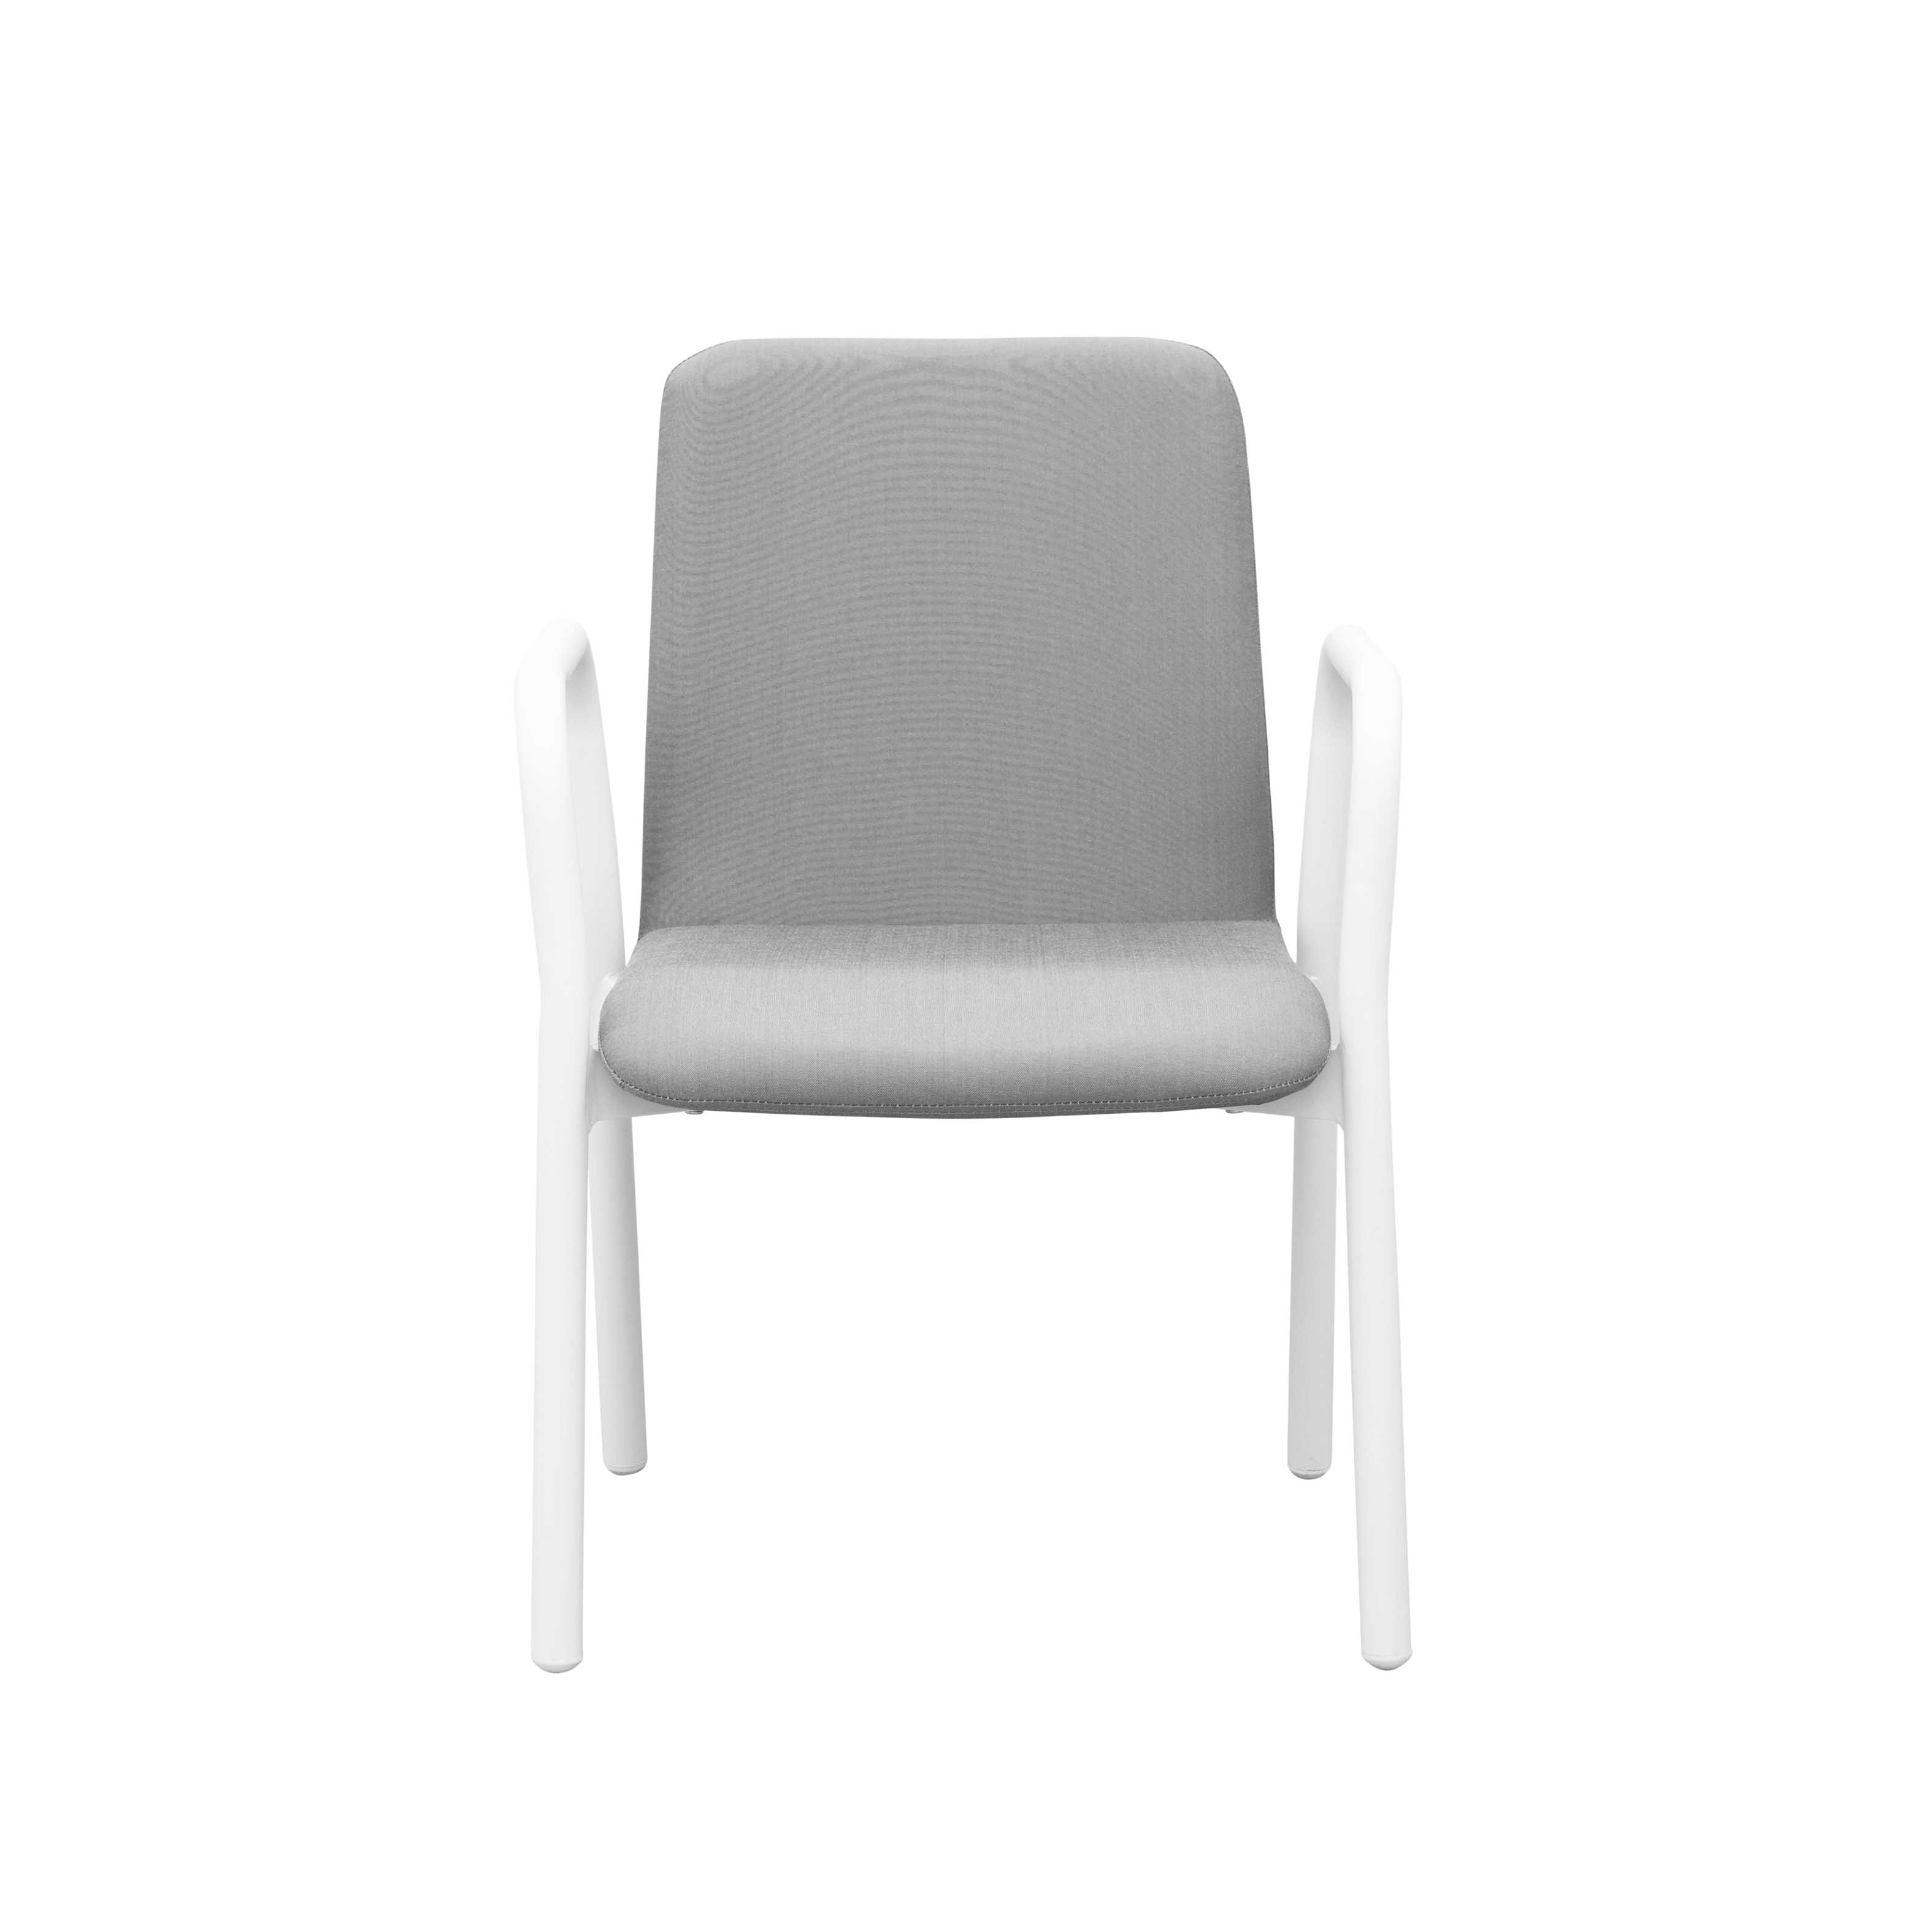 Houston fabric dining chair S3